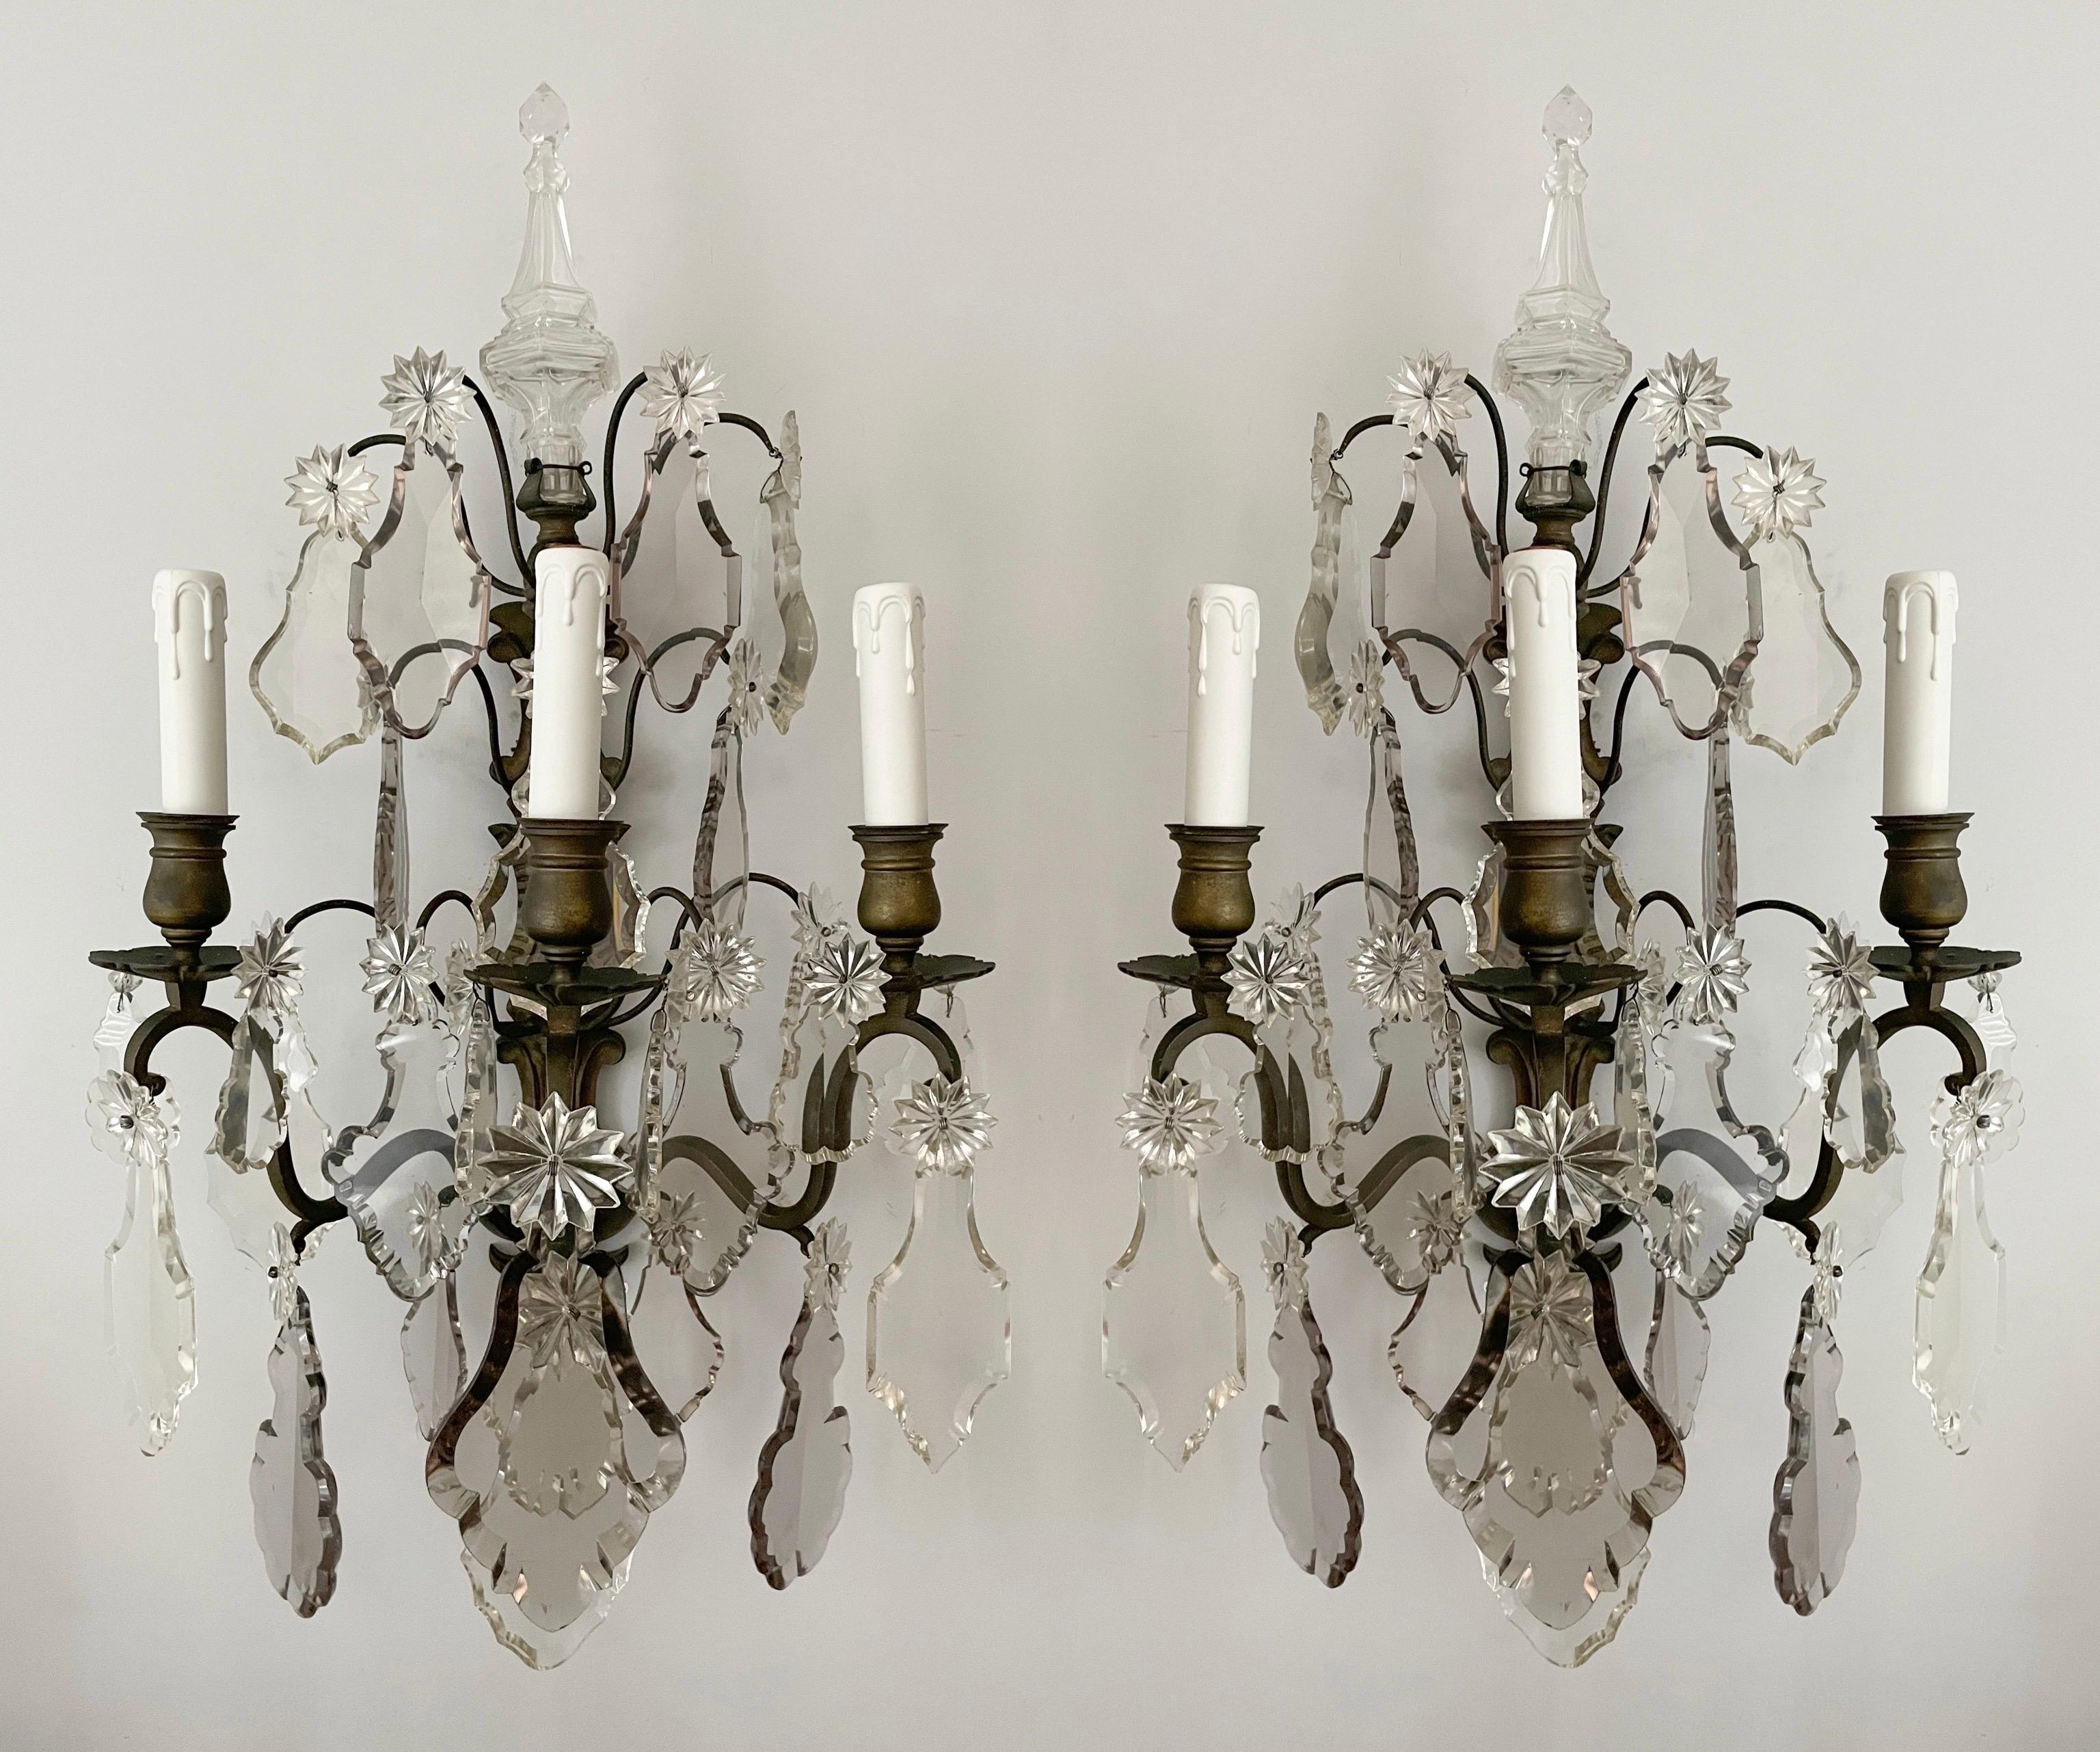 Exceptional, French 1920s crystal and bronze sconces in the Louis XVI style. 

The sconces feature bronze frames adorned with a fine assortment of French crystal pedagogues in clear and smoke hues. Each sconce is crowned with an impressive hollow